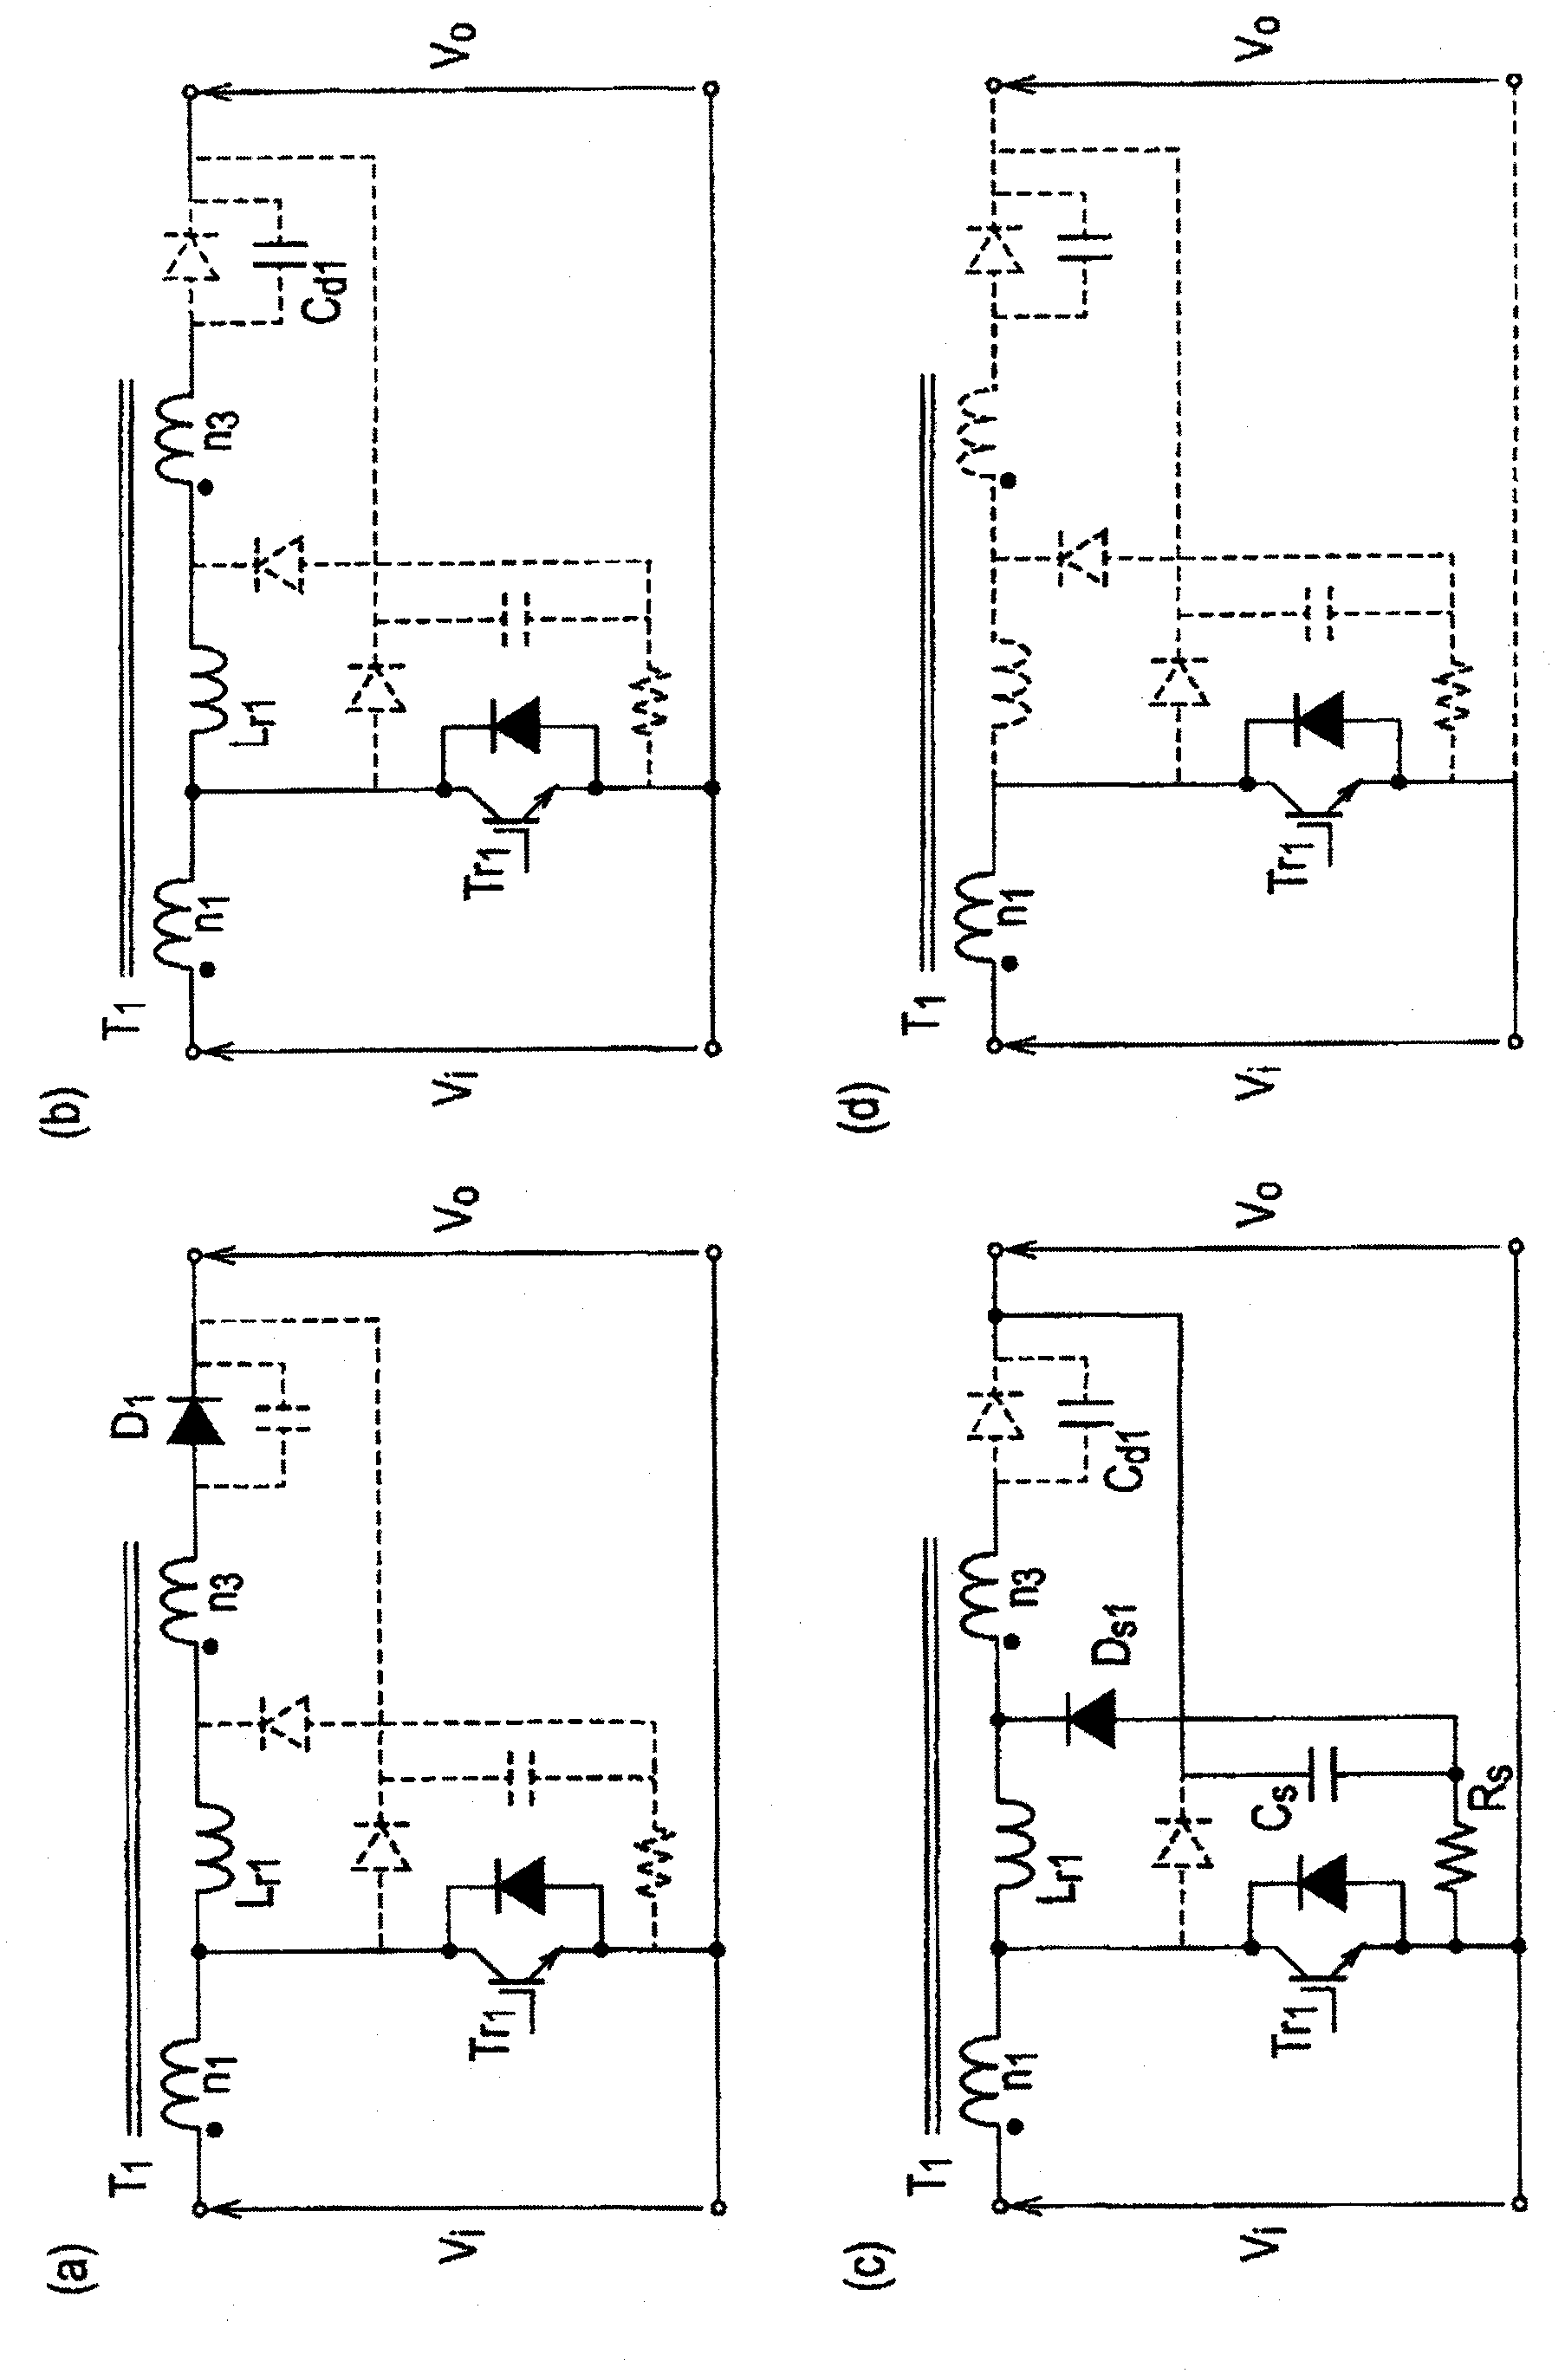 DC-DC converter with snubber circuit